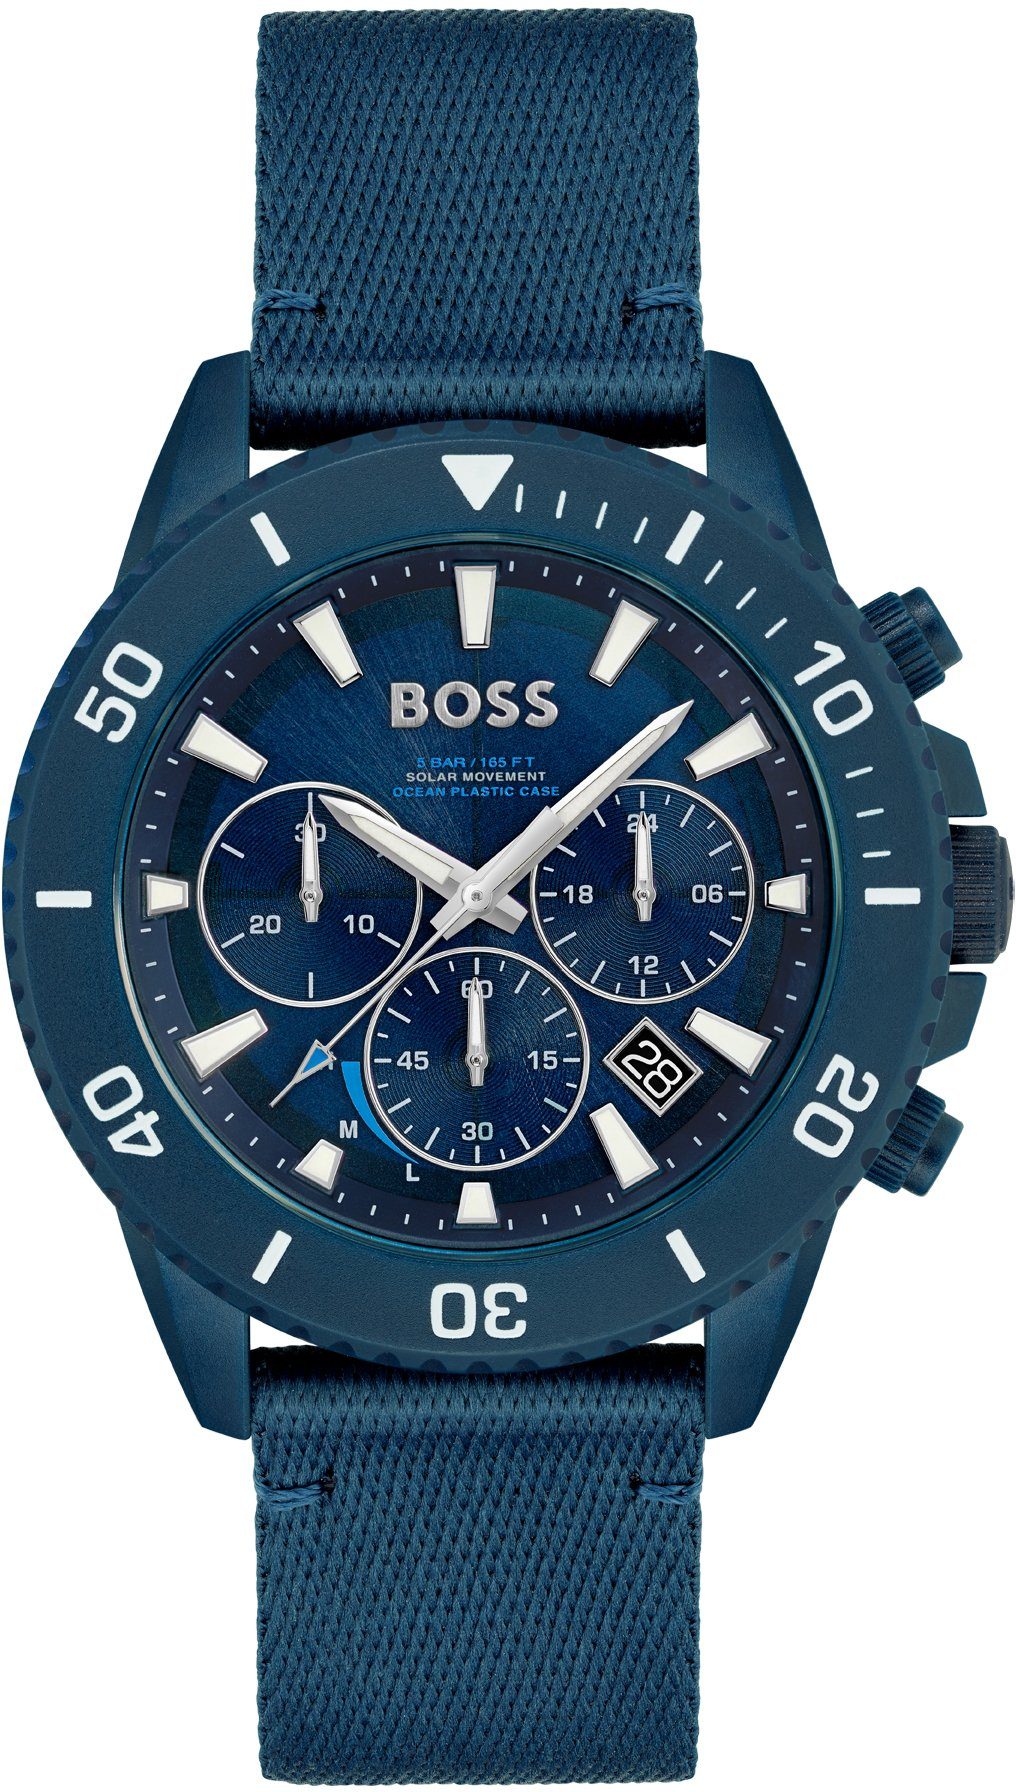 BOSS Chronograph Admiral #tide, 1513919 Sustainable